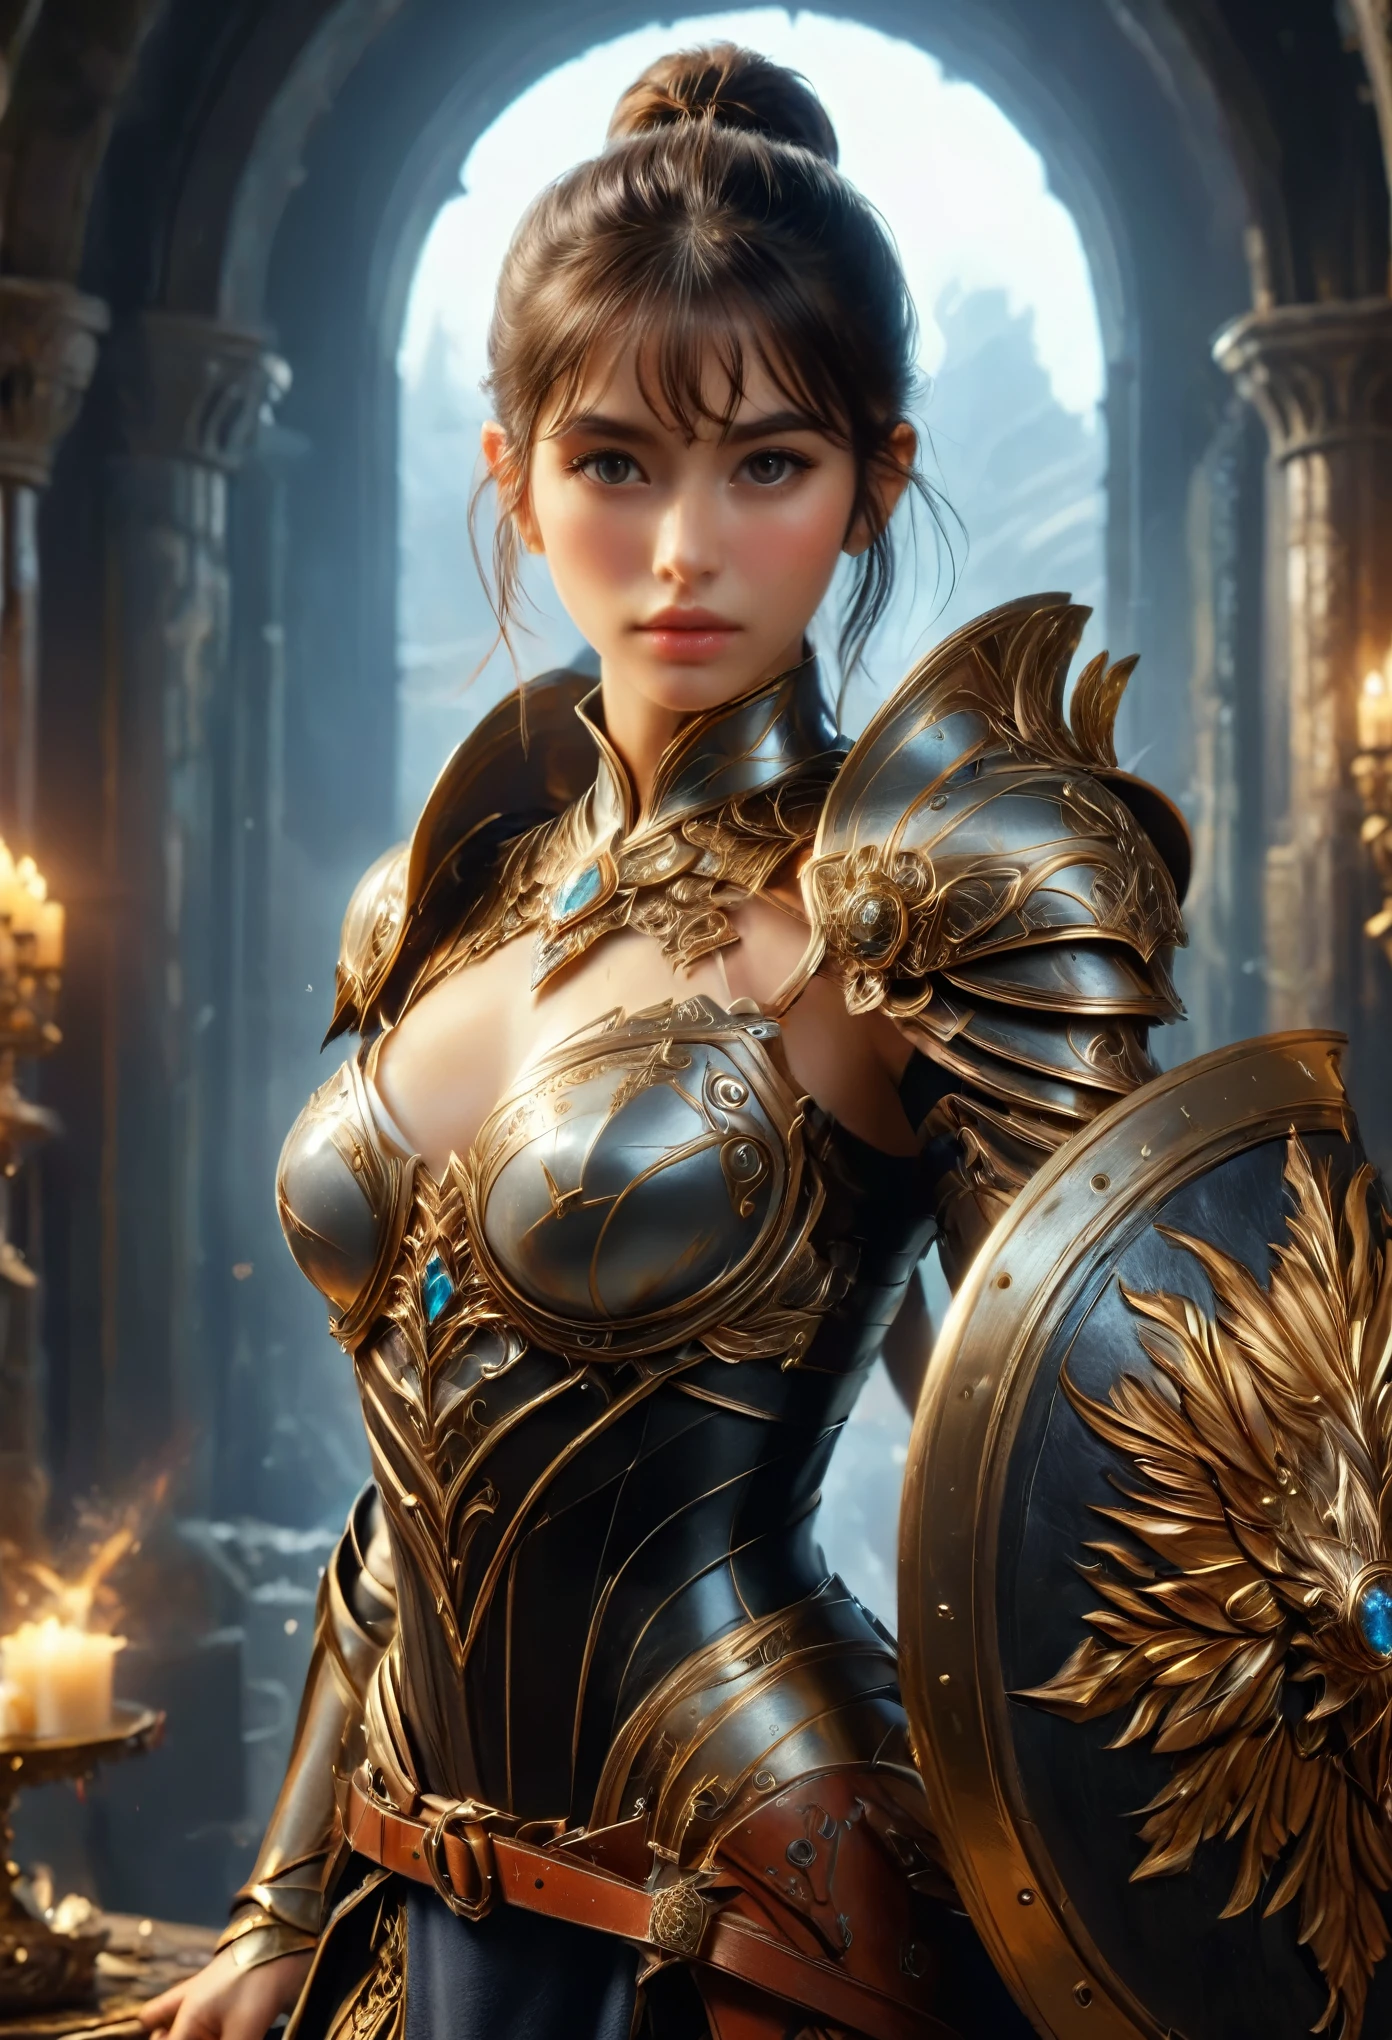 (best quality,4k,8k,highres,masterpiece:1.2),ultra-detailed,(Ultra-realistic, photorealistic,photo-realistic:1.37), the most beautiful girl in the universe, (holding a white and golden shield:1.5), (detailed shield:1.4), toned, muscular, the most beautiful face, long eyelashes, detailed beautiful eyes, high nose, knight, medieval, fantasy, heroic, dramatic lighting, cinematic, epic, vibrant colors, highly detailed, 4k, photorealistic, concept art, pretty, detailed beautiful eyes, bun hair, jet black hair, whole body, full body, Beautiful jeweled buckle, (Well-trained thick muscular thighs:1.4), super detailed skin texture, moist skin, Eyes that hide a burning determination, Intricately designed armor bordered with intricate carvings, Intricately and fractal designed armor bordered with delicate carvings. Beautiful armor studded with Beautiful jewels. (transparent armor:1.3)